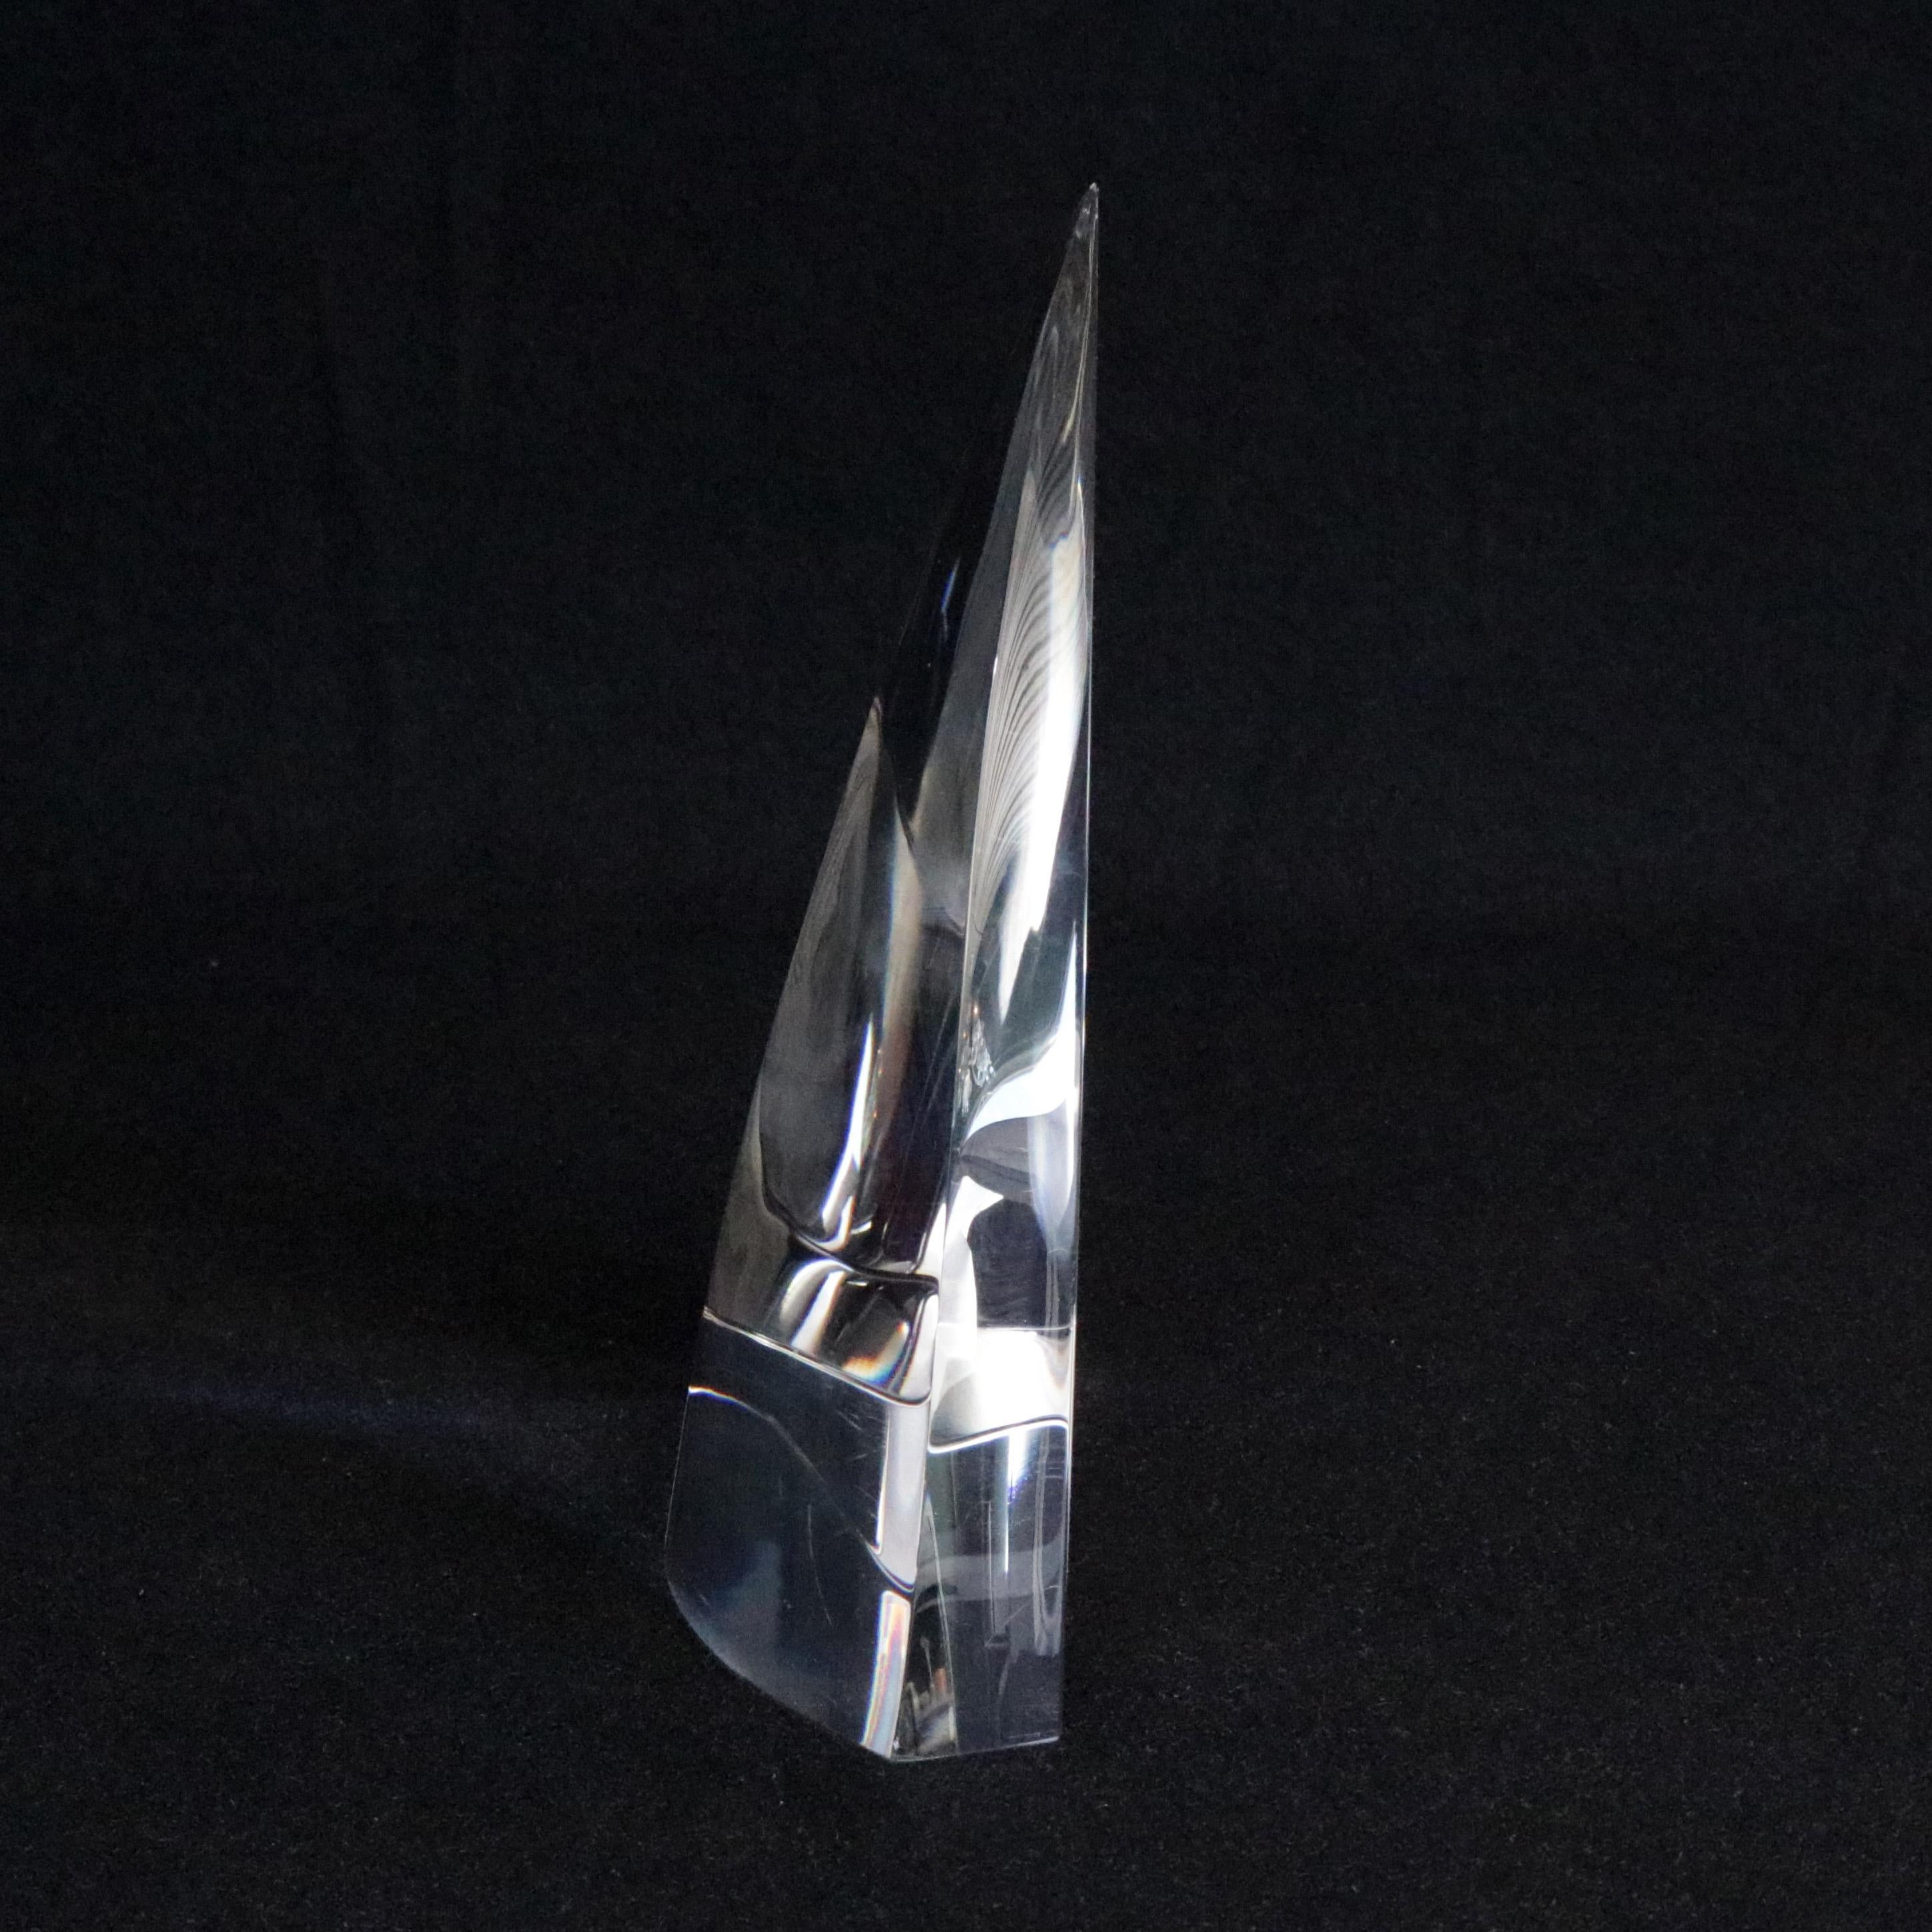 20th Century Steuben Figurative Crystal Sculpture of Close to the Wind Sailboat Main Sail